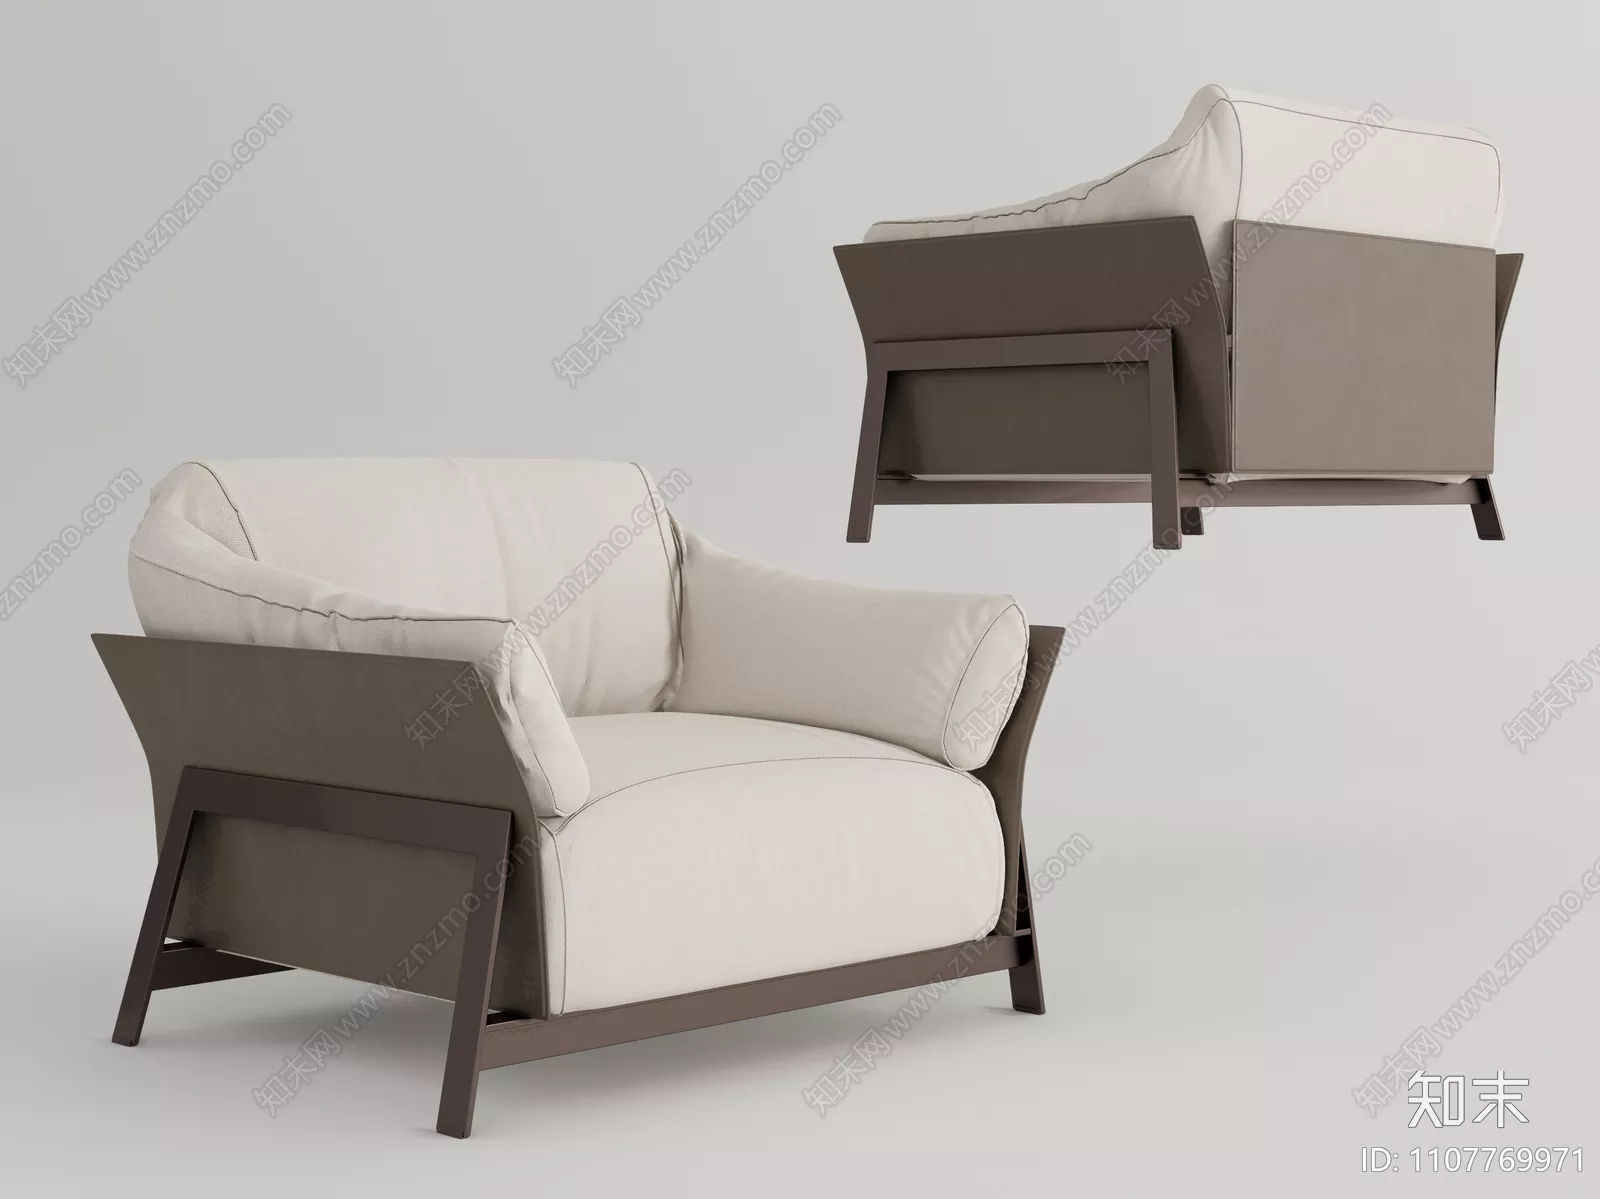 MODERN SOFA - SKETCHUP 3D MODEL - VRAY OR ENSCAPE - ID13151